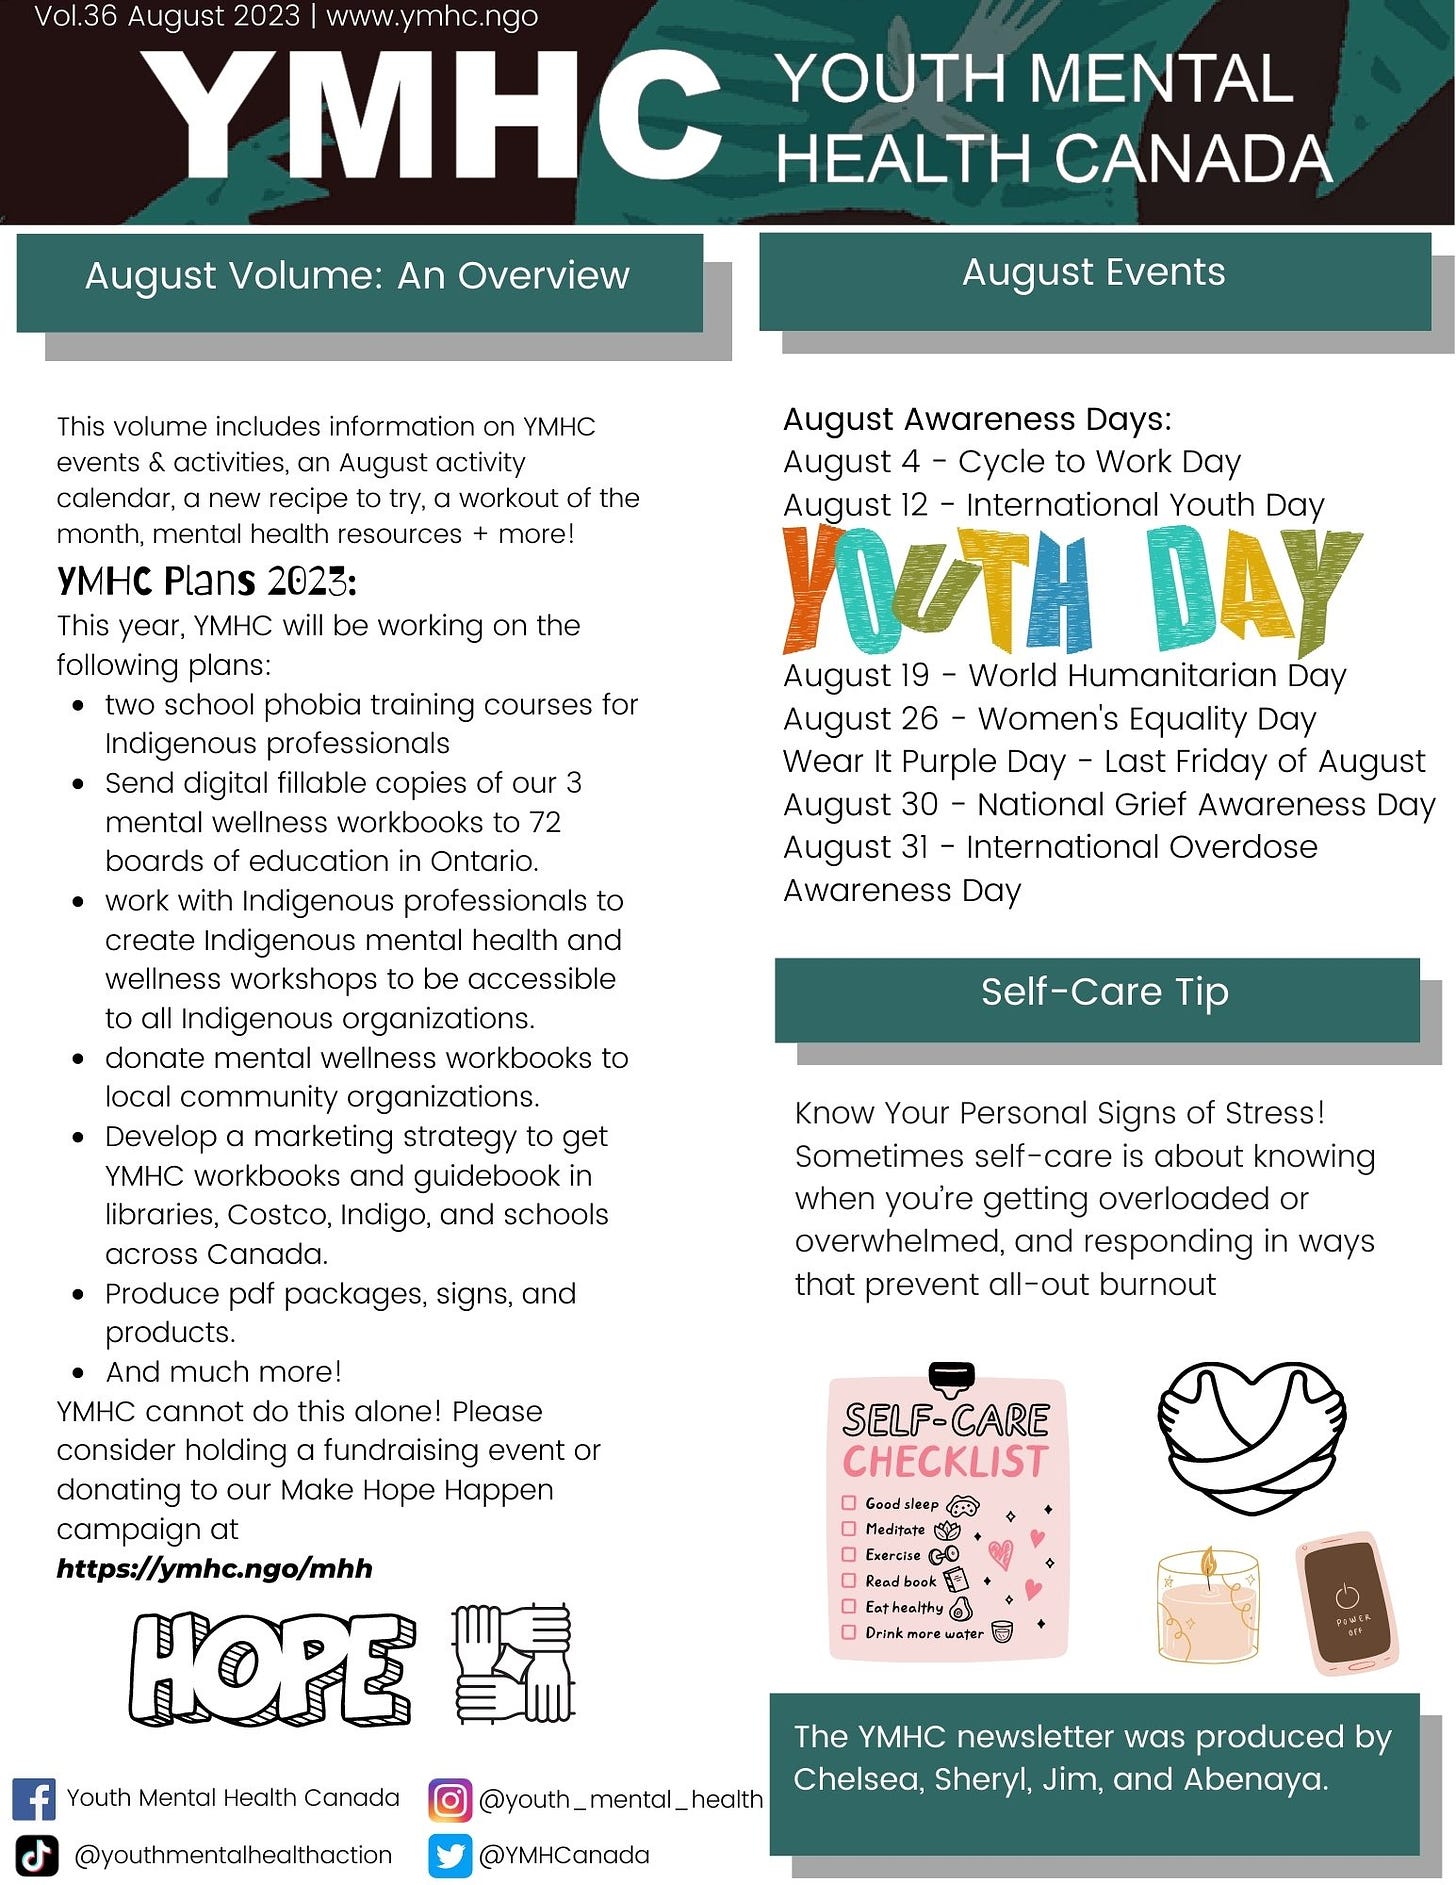 Know Your Personal Signs of Stress! Sometimes self-care is about knowing when you’re getting overloaded or overwhelmed, and responding in ways that prevent all-out burnout This volume includes information on YMHC events & activities, an August activity calendar, a new recipe to try, a workout of the month, mental health resources + more!  YMHC Plans 2023: This year, YMHC will be working on the following plans: two school phobia training courses for Indigenous professionals Send digital fillable copies of our 3 mental wellness workbooks to 72 boards of education in Ontario.  work with Indigenous professionals to create Indigenous mental health and wellness workshops to be accessible to all Indigenous organizations. donate mental wellness workbooks to local community organizations. Develop a marketing strategy to get YMHC workbooks and guidebook in libraries, Costco, Indigo, and schools across Canada. Produce pdf packages, signs, and products.  And much more!  YMHC cannot do this alone! Please consider holding a fundraising event or donating to our Make Hope Happen campaign at  https://ymhc.ngo/mhh Self-Care Tip August Awareness Days:  August 4 - Cycle to Work Day August 12 - International Youth Day    August 19 - World Humanitarian Day August 26 - Women's Equality Day Wear It Purple Day - Last Friday of August August 30 - National Grief Awareness Day  August 31 - International Overdose Awareness Day